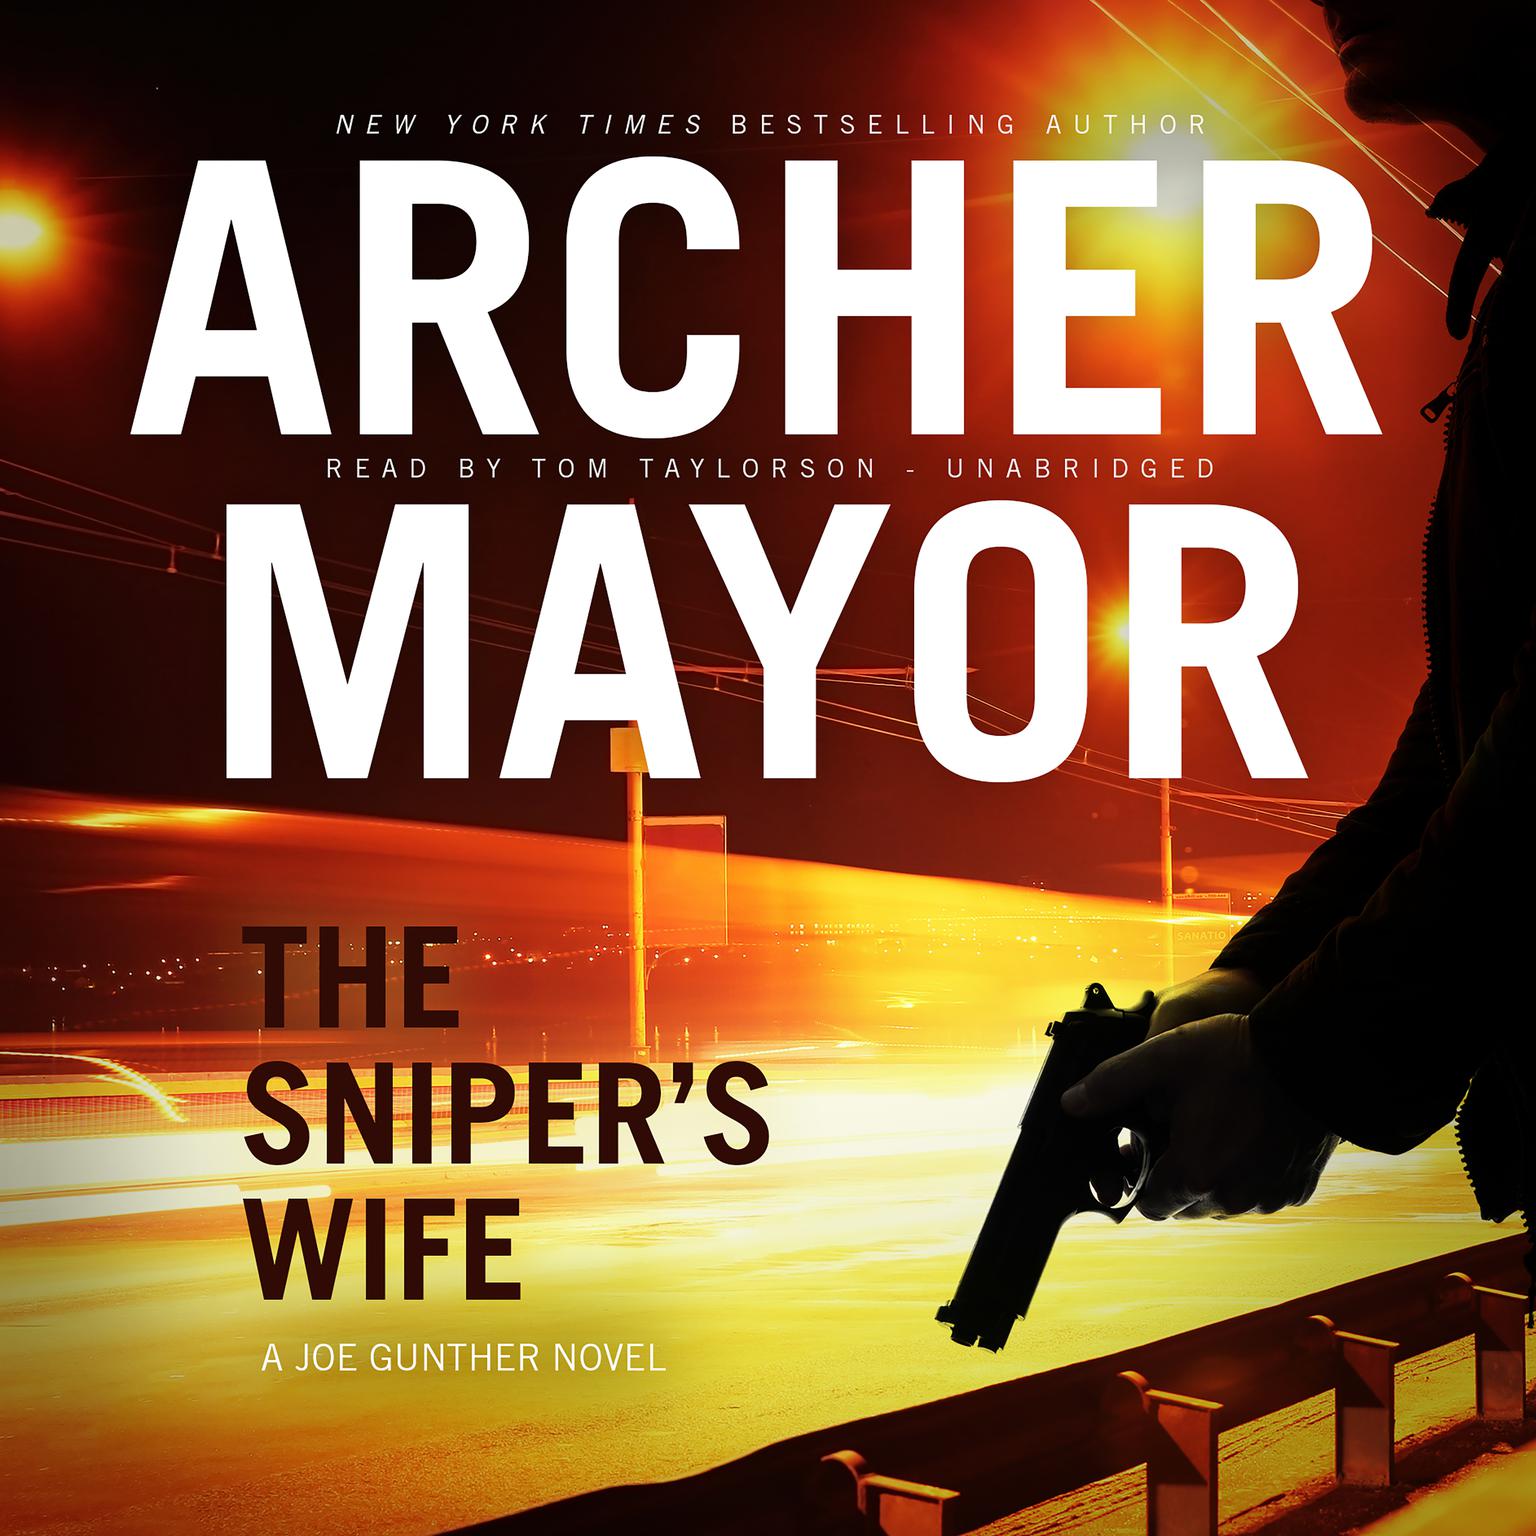 The Sniper’s Wife Audiobook, by Archer Mayor